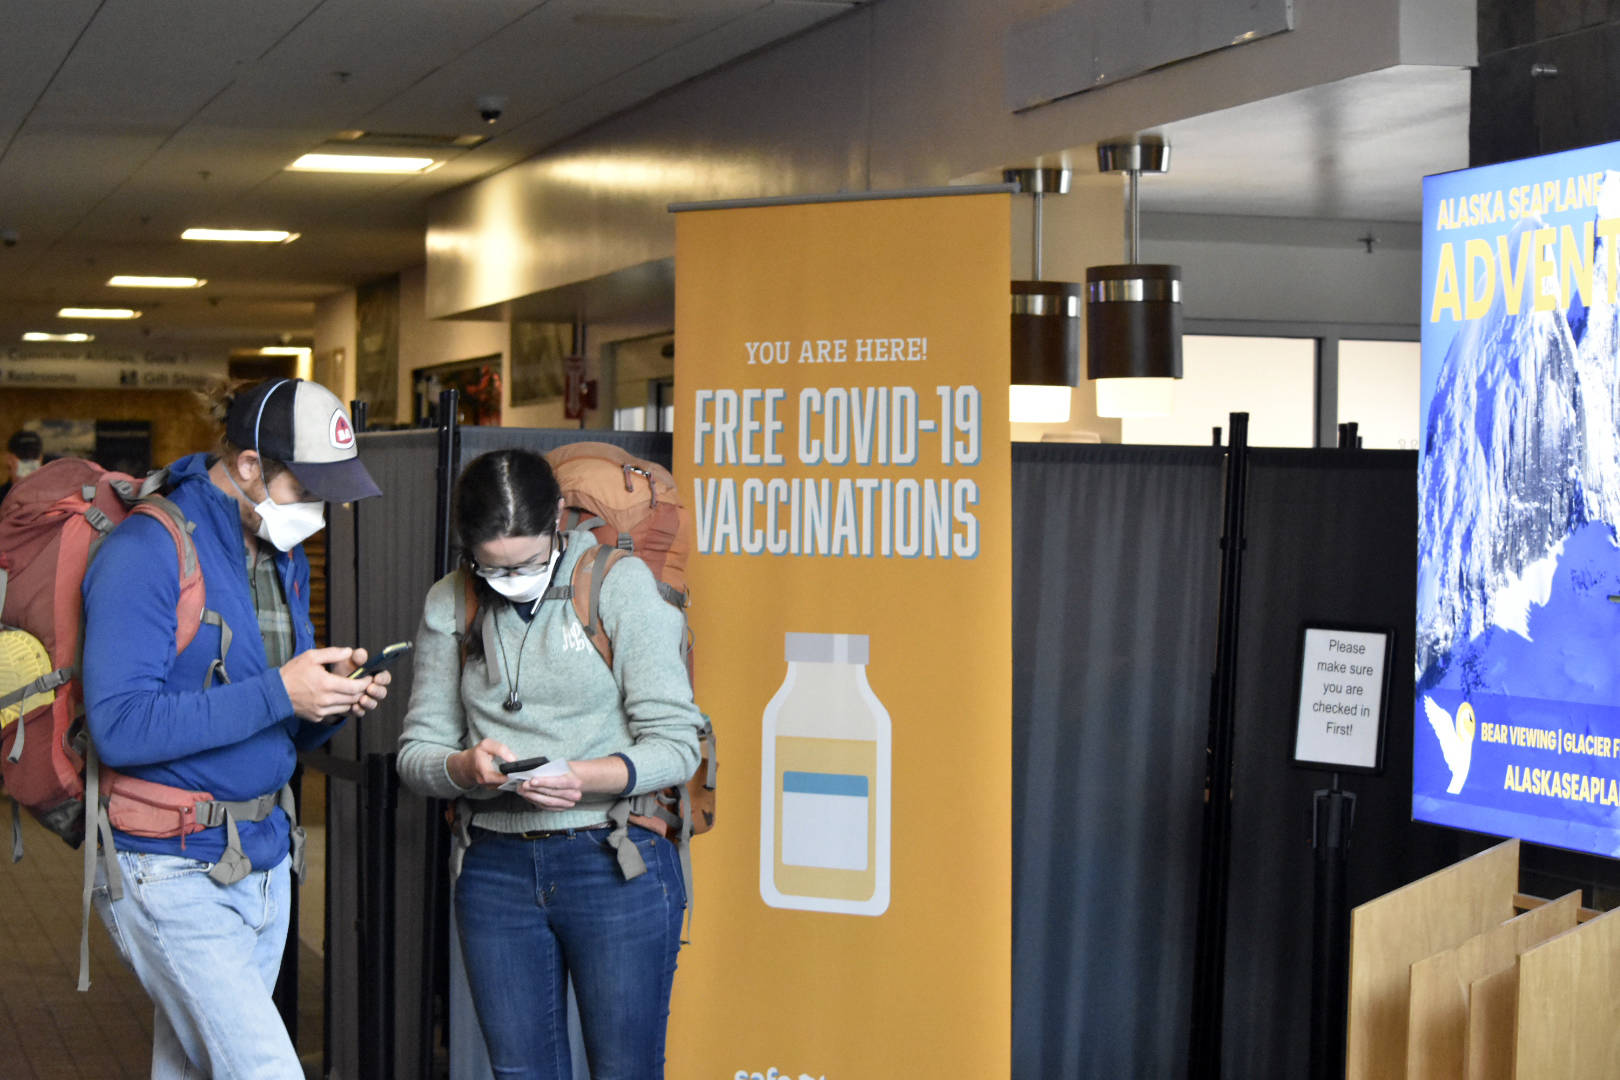 Peter Segall / Juneau Empire 
Travelers check their cellphones near a sign promoting COVID-19 vaccinations in the Juneau International Airport on Thursday. Federal officials are recommending a booster shot for the COVID-19 vaccine, and local health authorities say the rollout will likely be similar to the initial vaccine distribution.